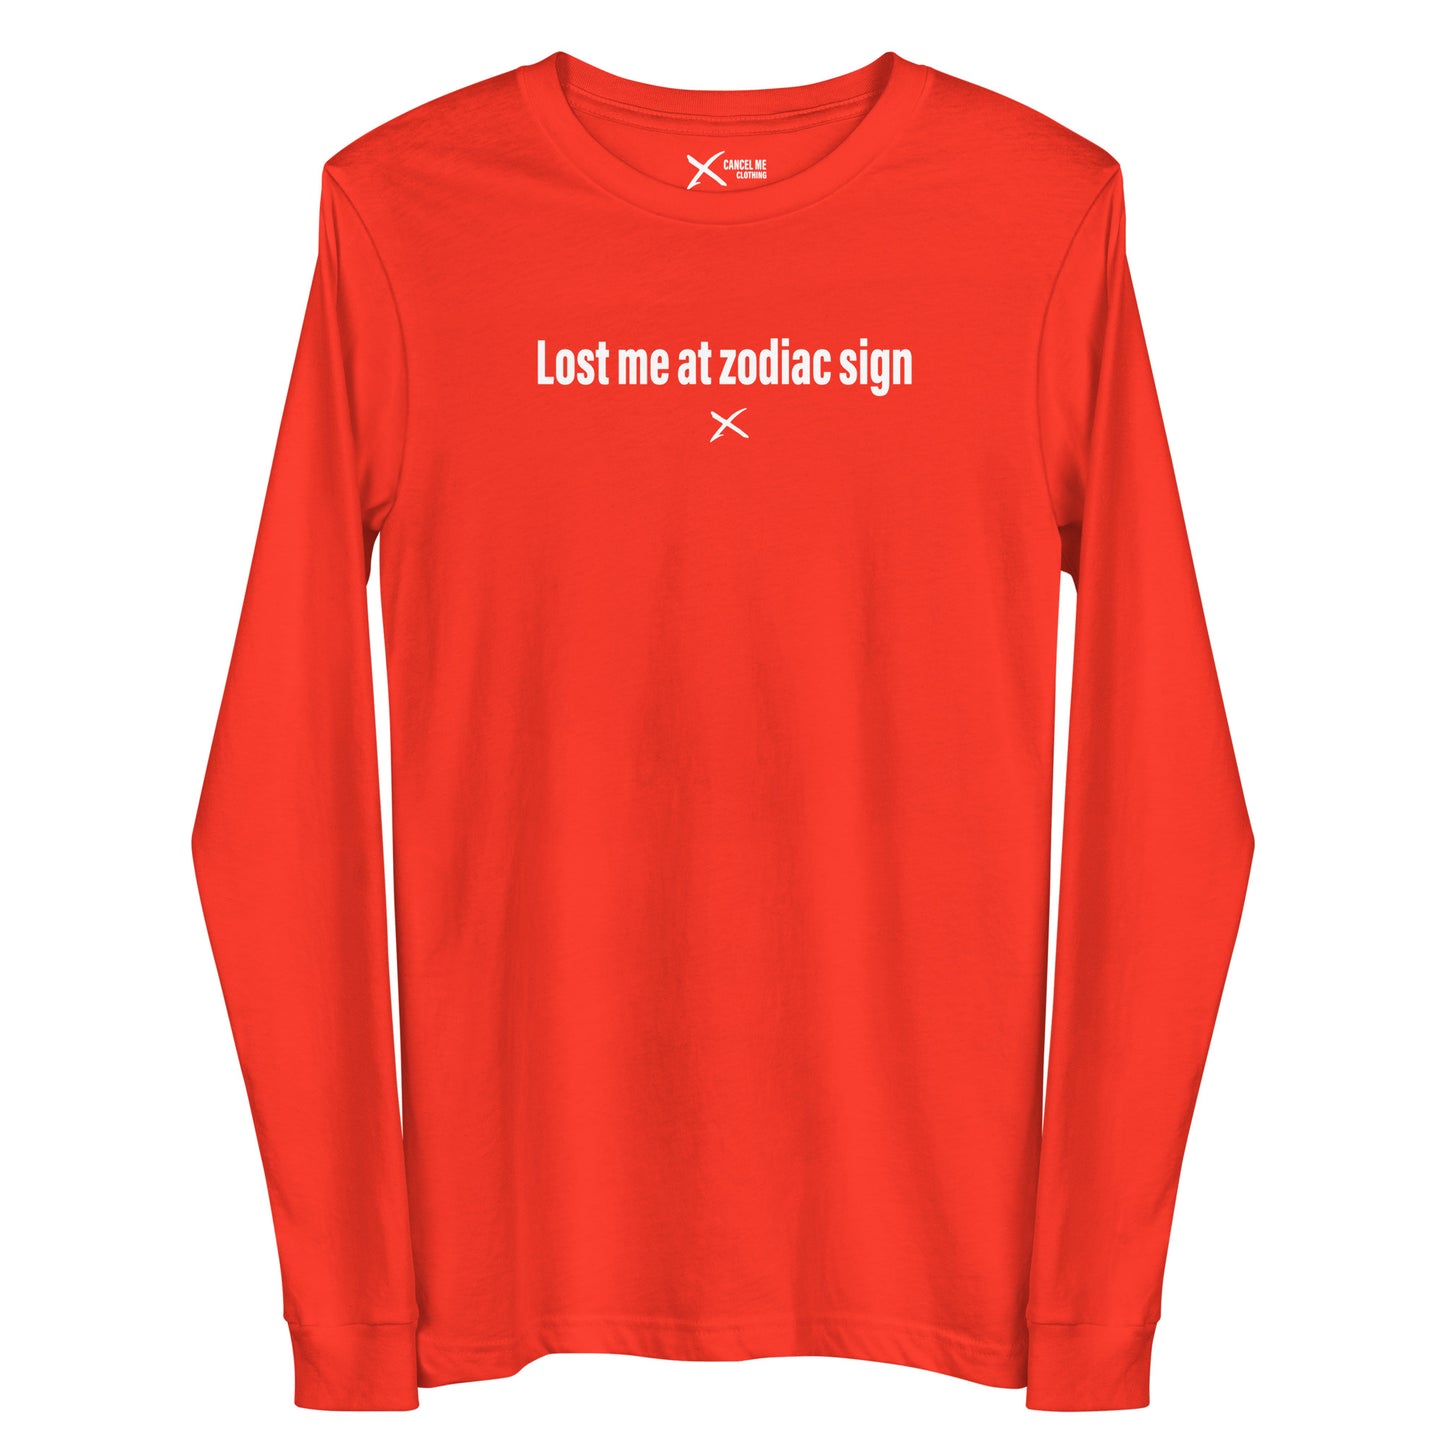 Lost me at zodiac sign - Longsleeve